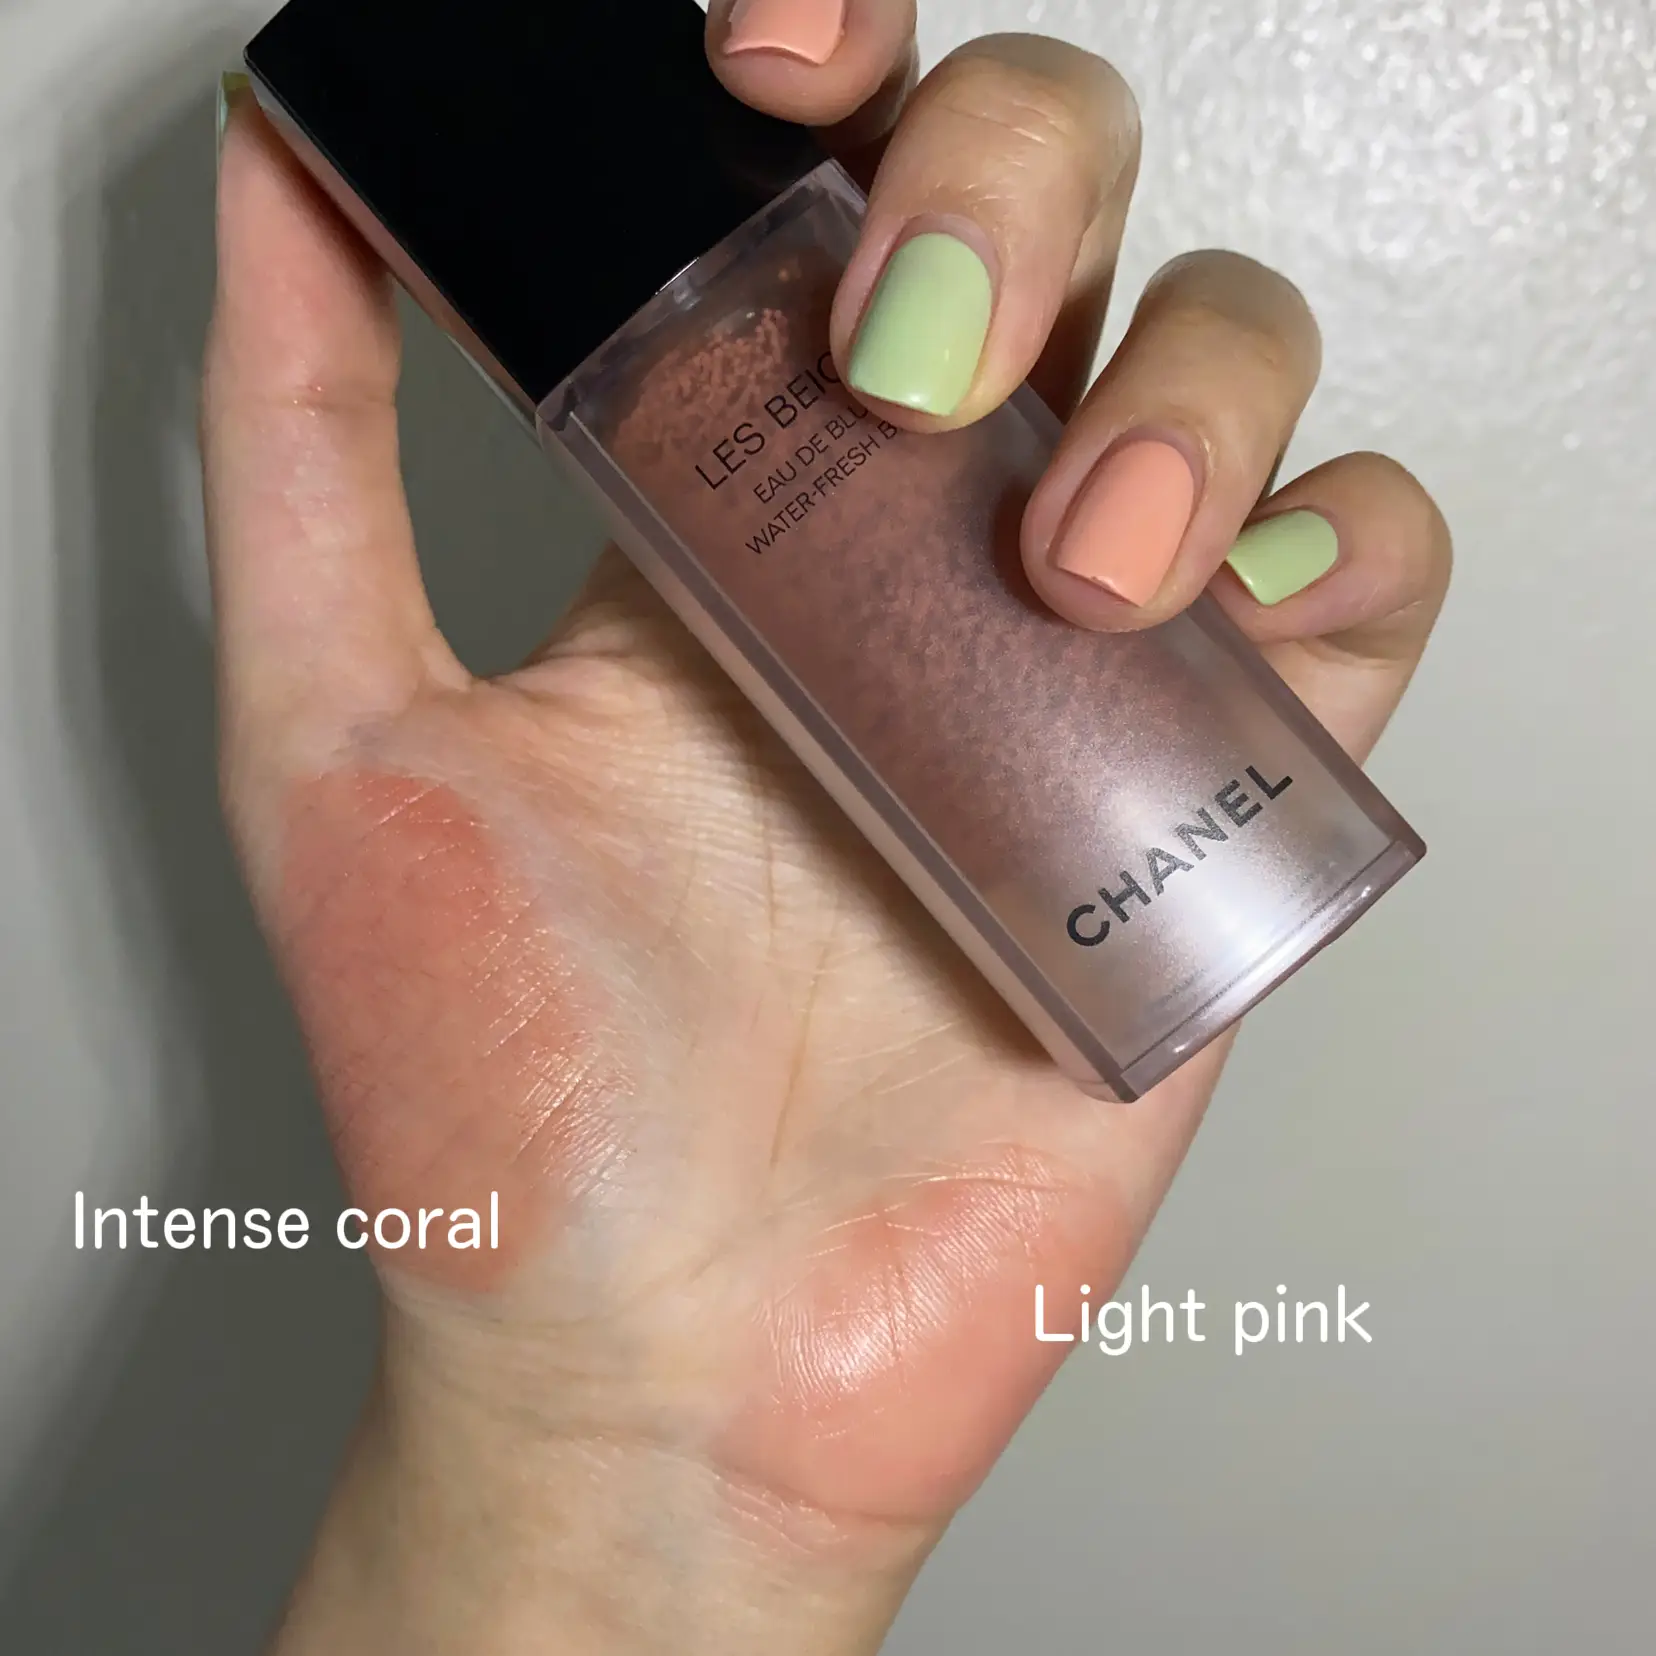 Chanel water fresh blush & Trips how to apply💖, Gallery posted by  LittlecatReview